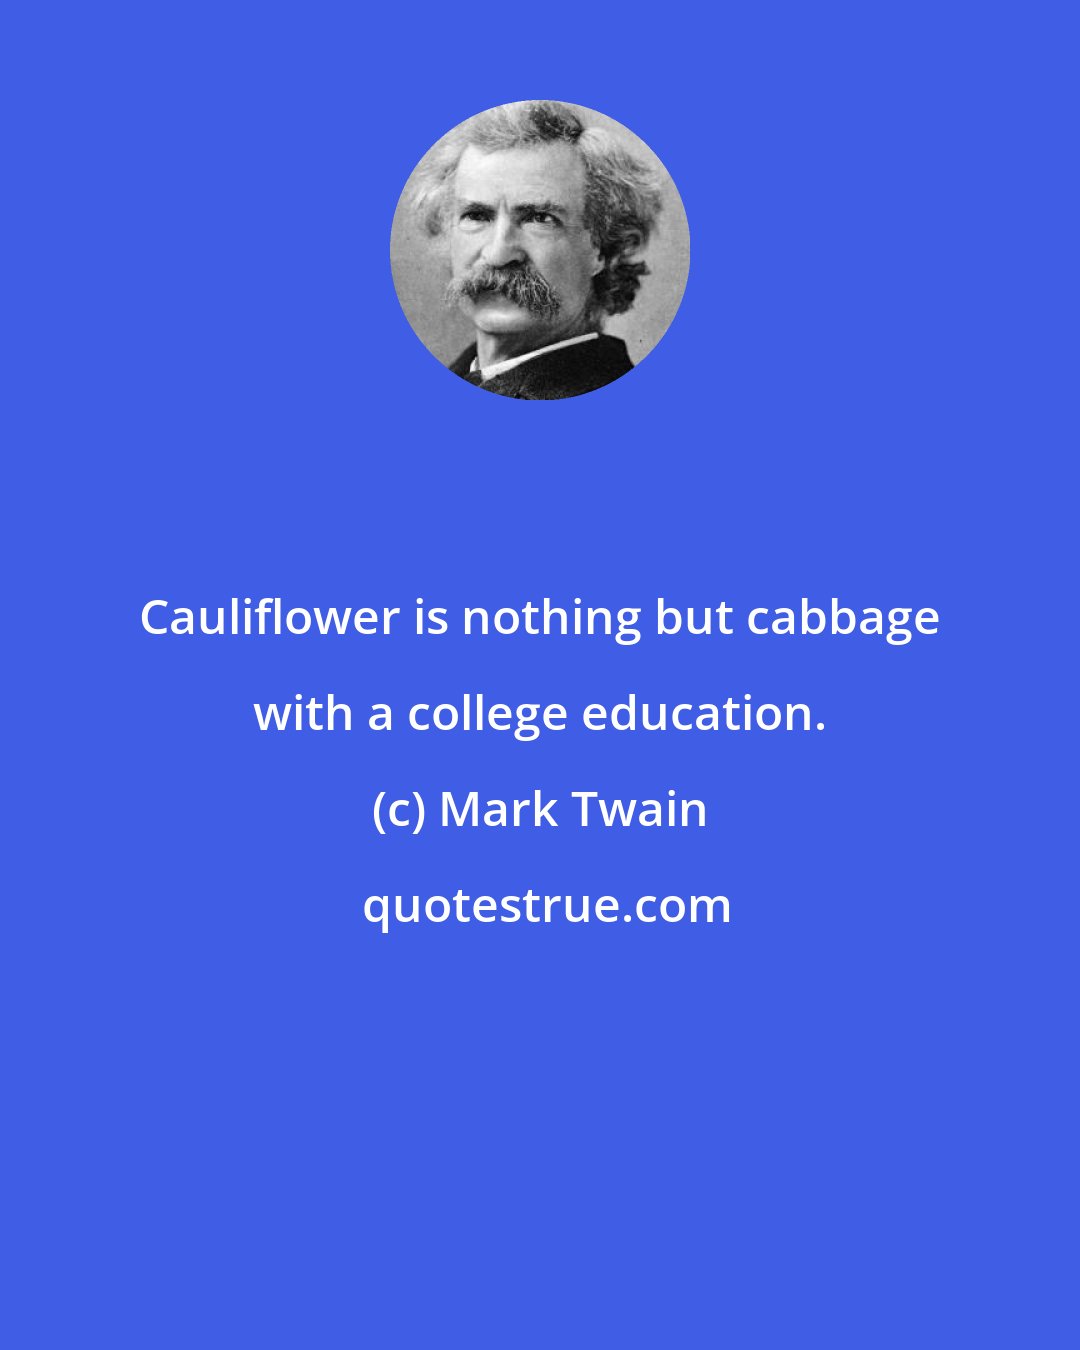 Mark Twain: Cauliflower is nothing but cabbage with a college education.